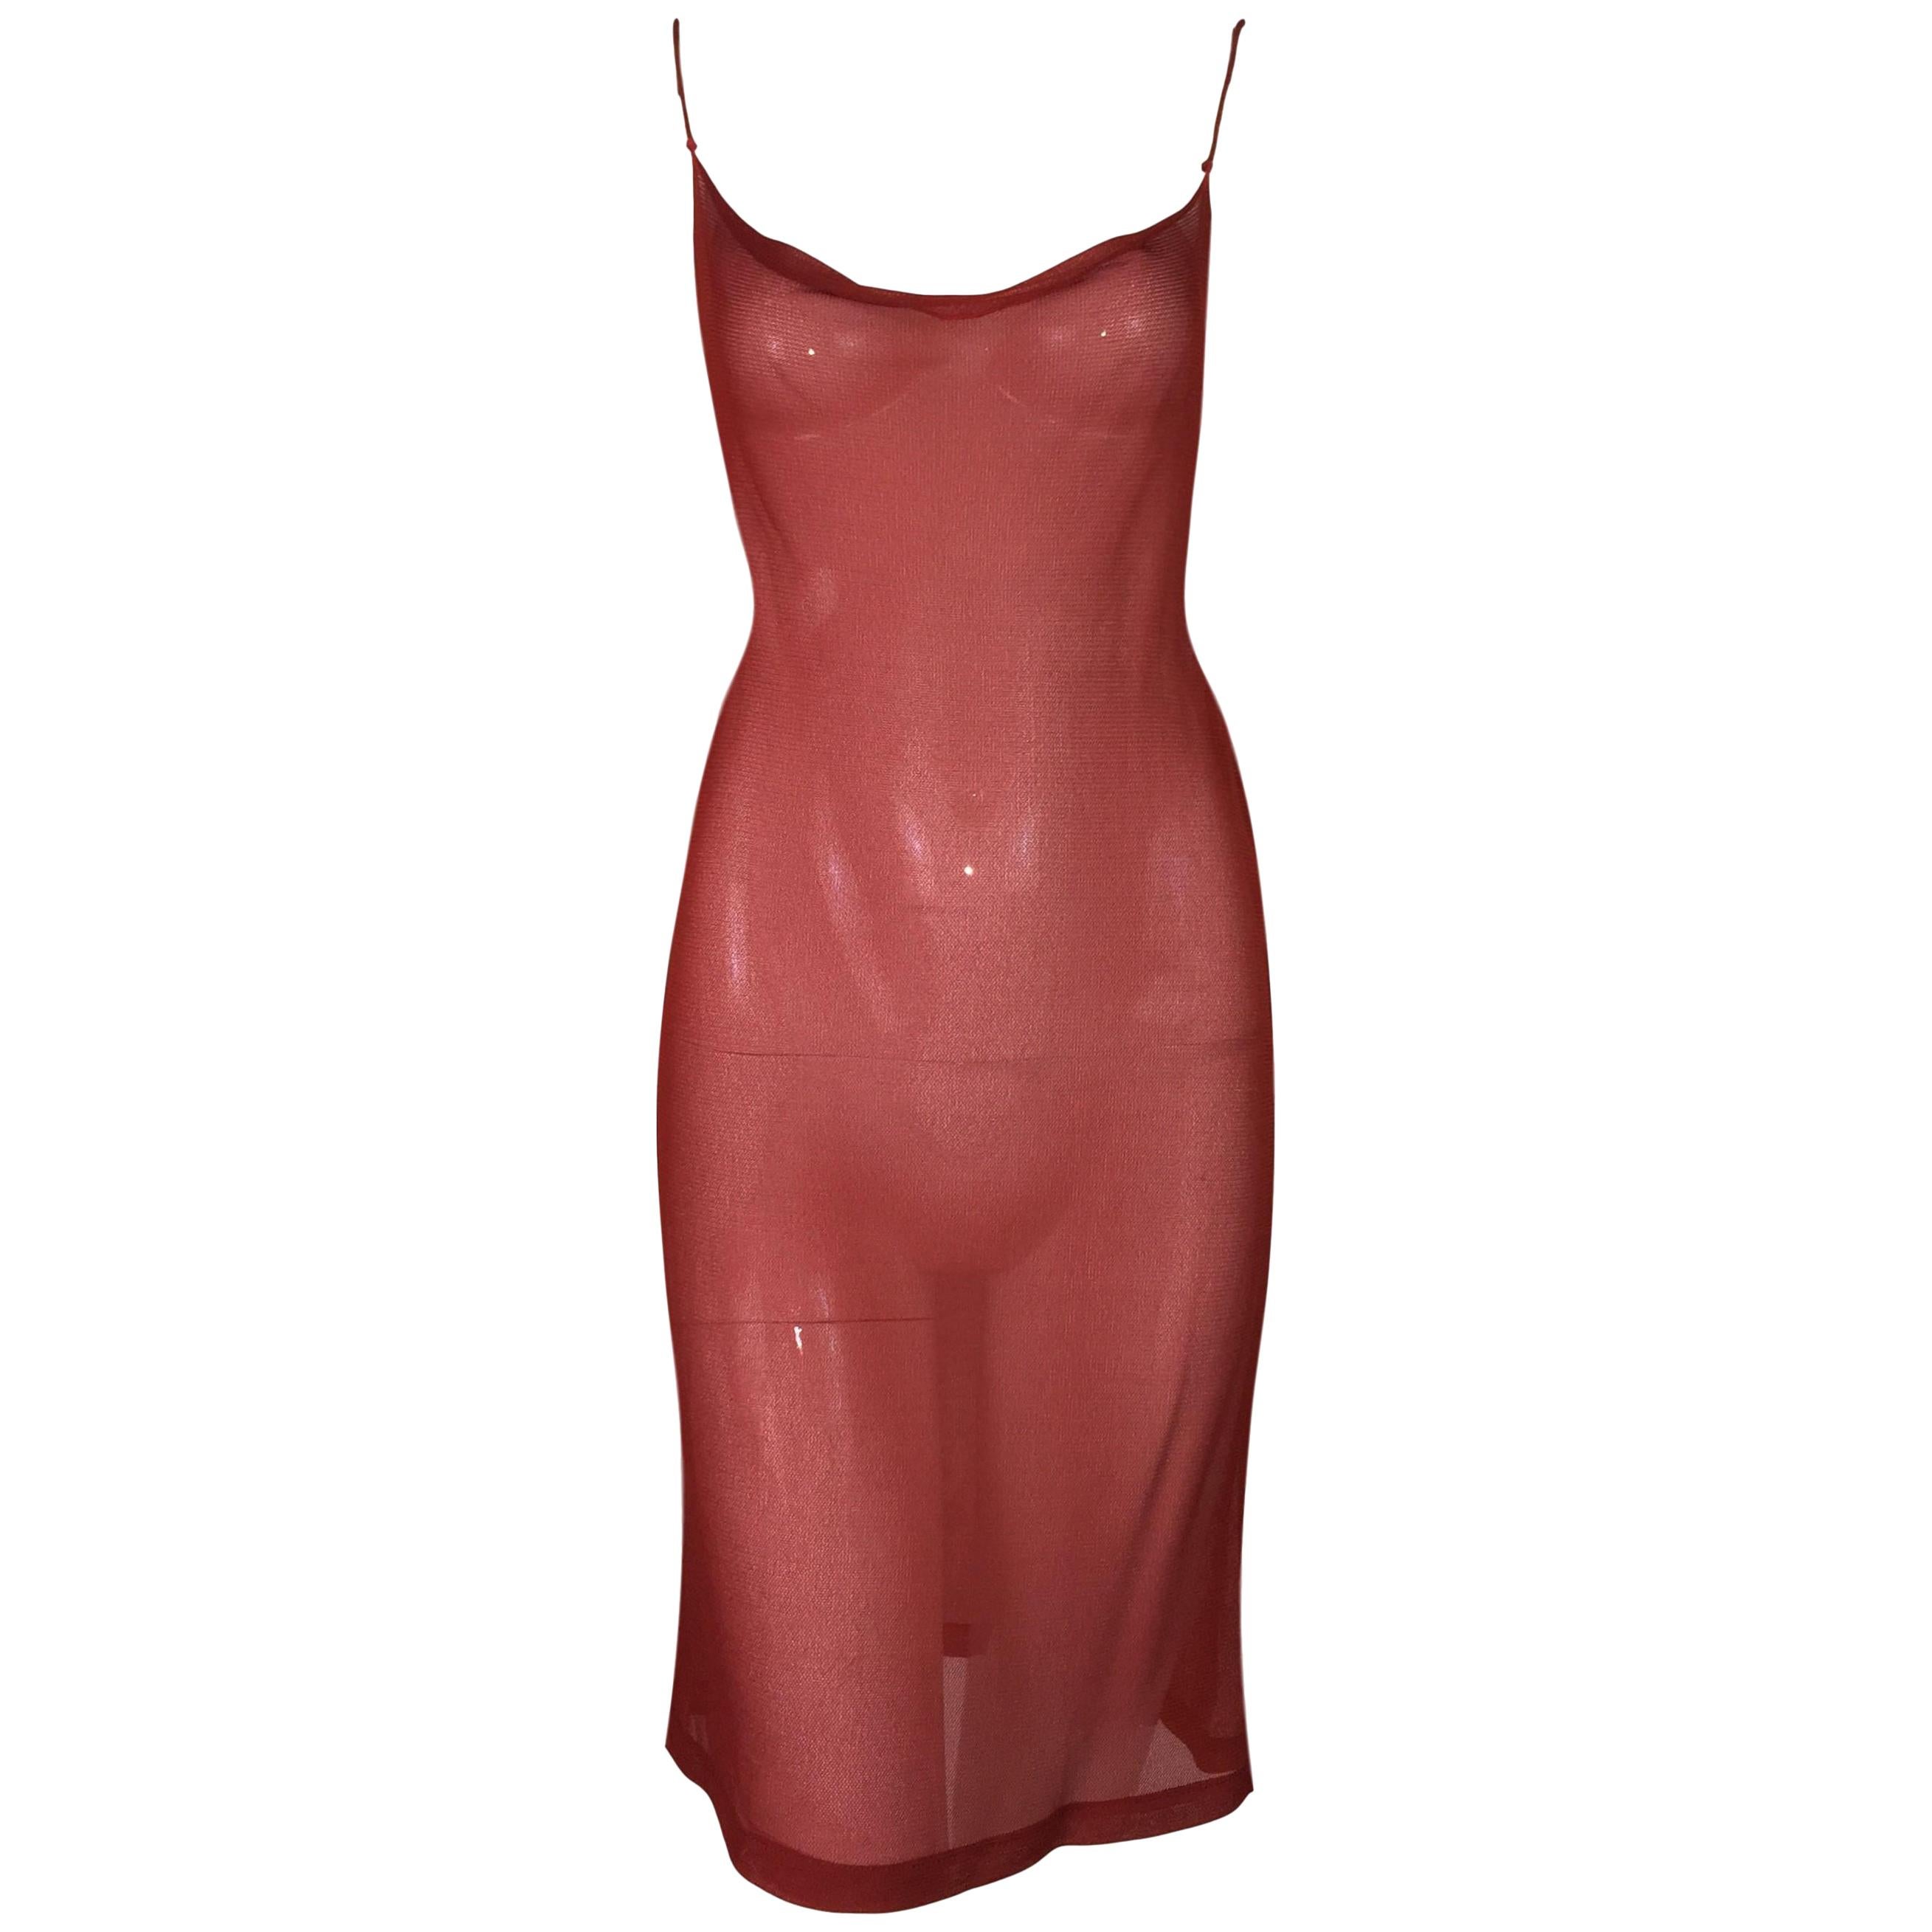 1997 Gucci by Tom Ford Sheer Red Slip Mini Dress